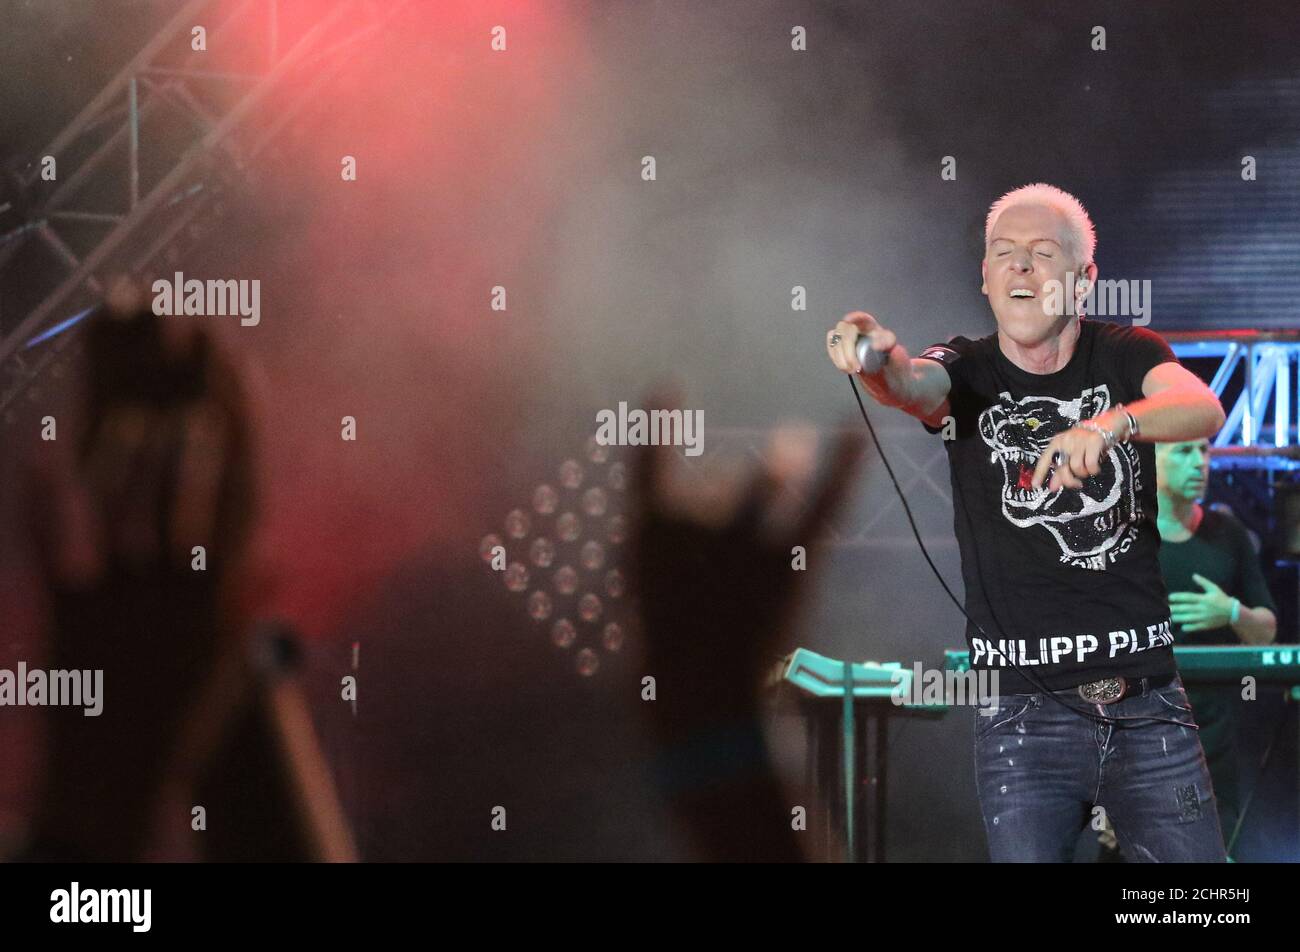 German techno band Scooter front man H.P. Baxxter performs at the ZBFest  rock festival in Balaklava, Crimea, August 5, 2017. REUTERS/Pavel Rebrov  Stock Photo - Alamy